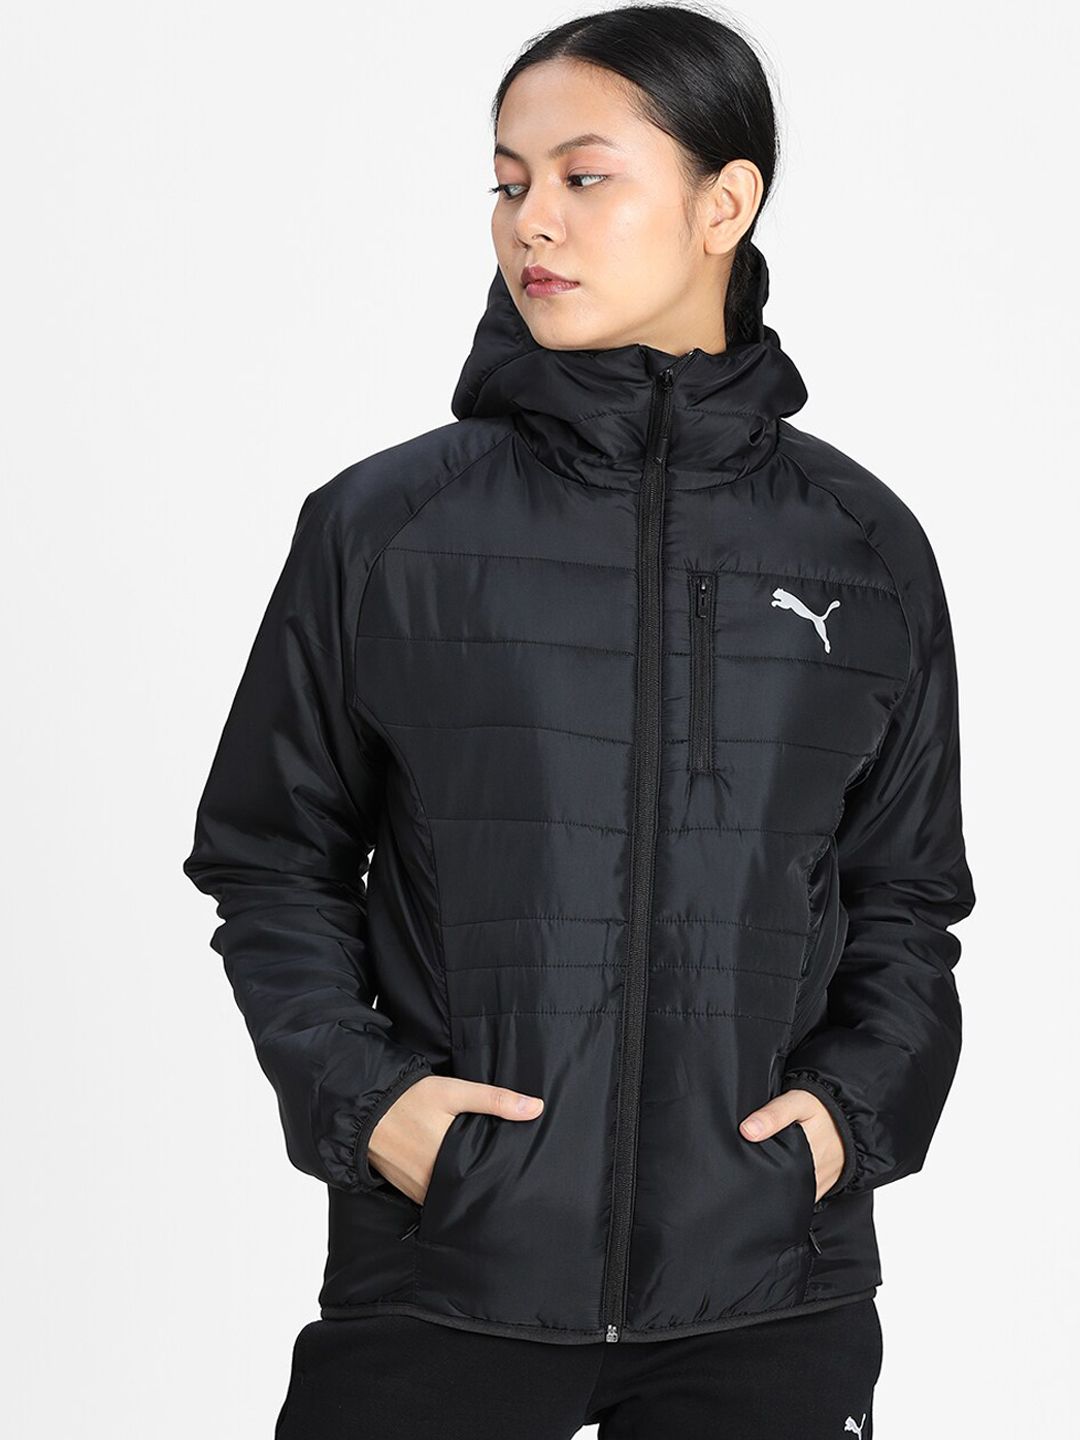 Puma Women Black Solid Padded Jacket Price in India